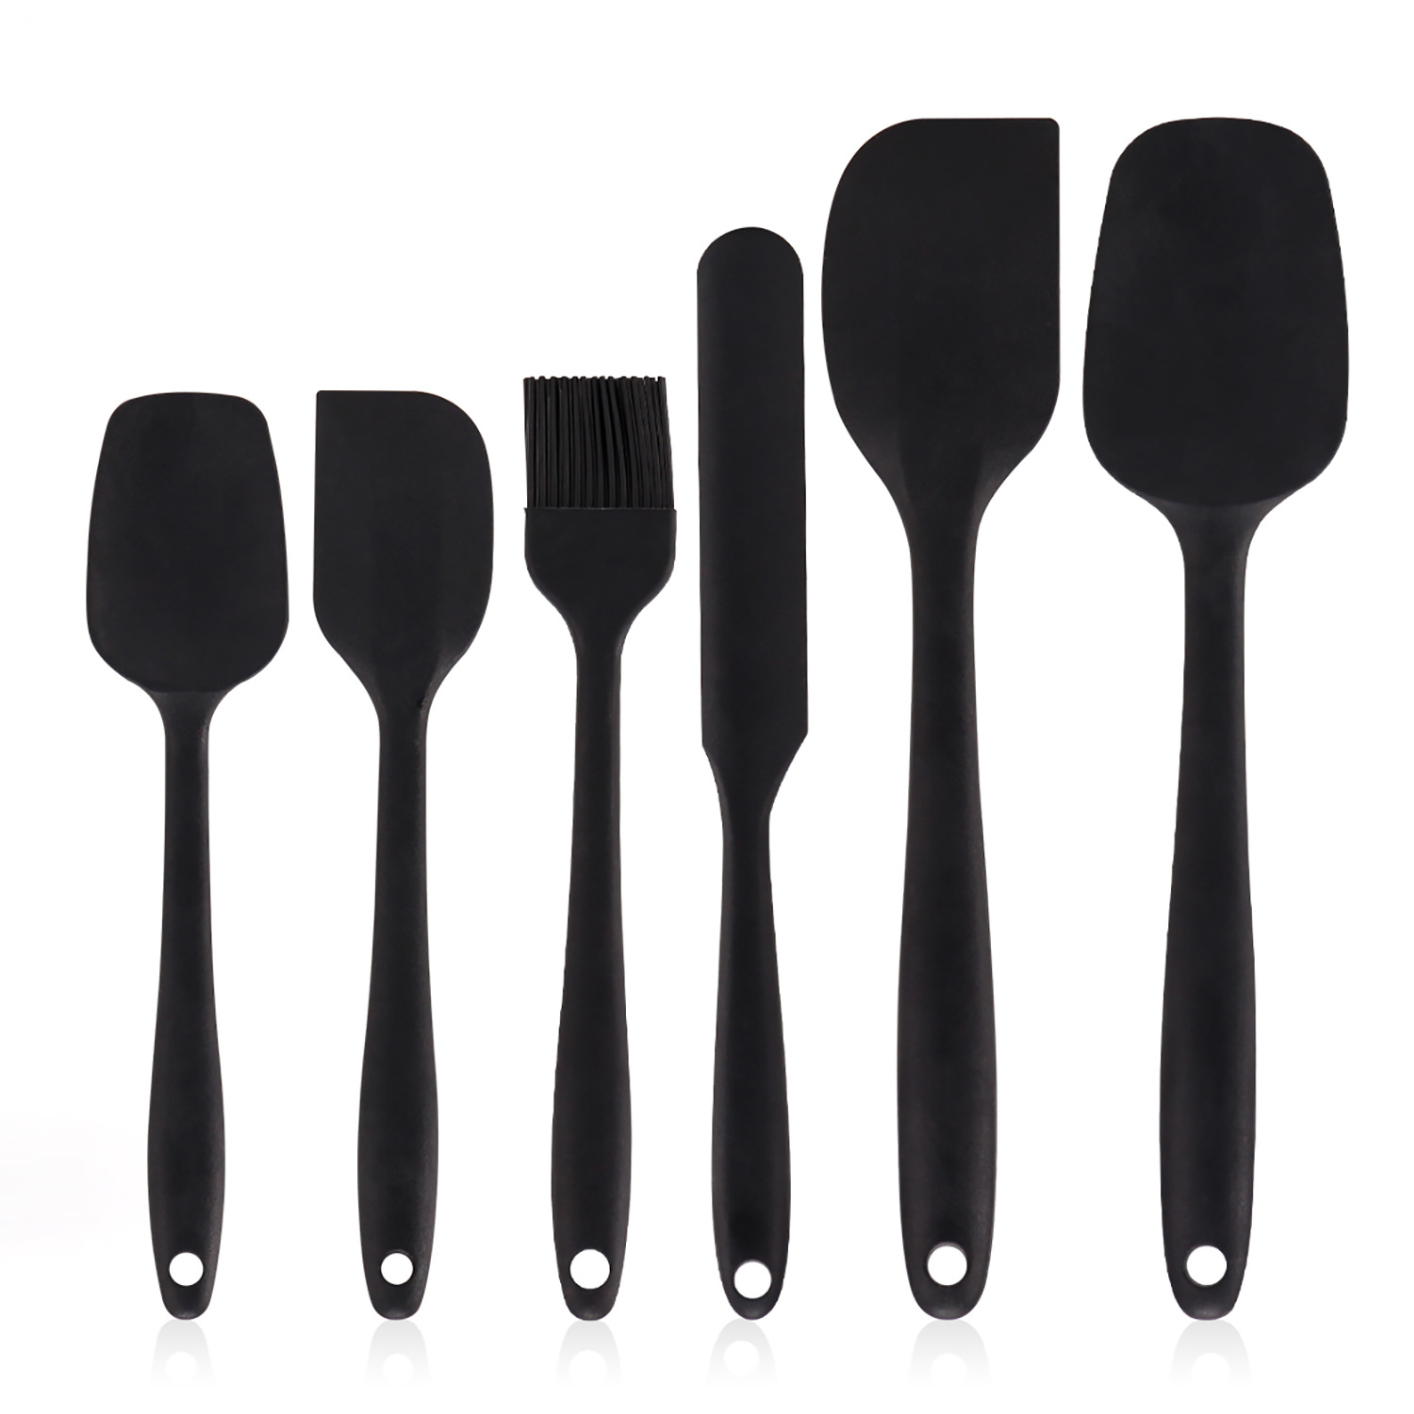 Q1041 6 Piece Silicone Spatula Set Non-Stick Heat-Resistant Spatulas Turner for Cooking Baking Mixing Baking Tools